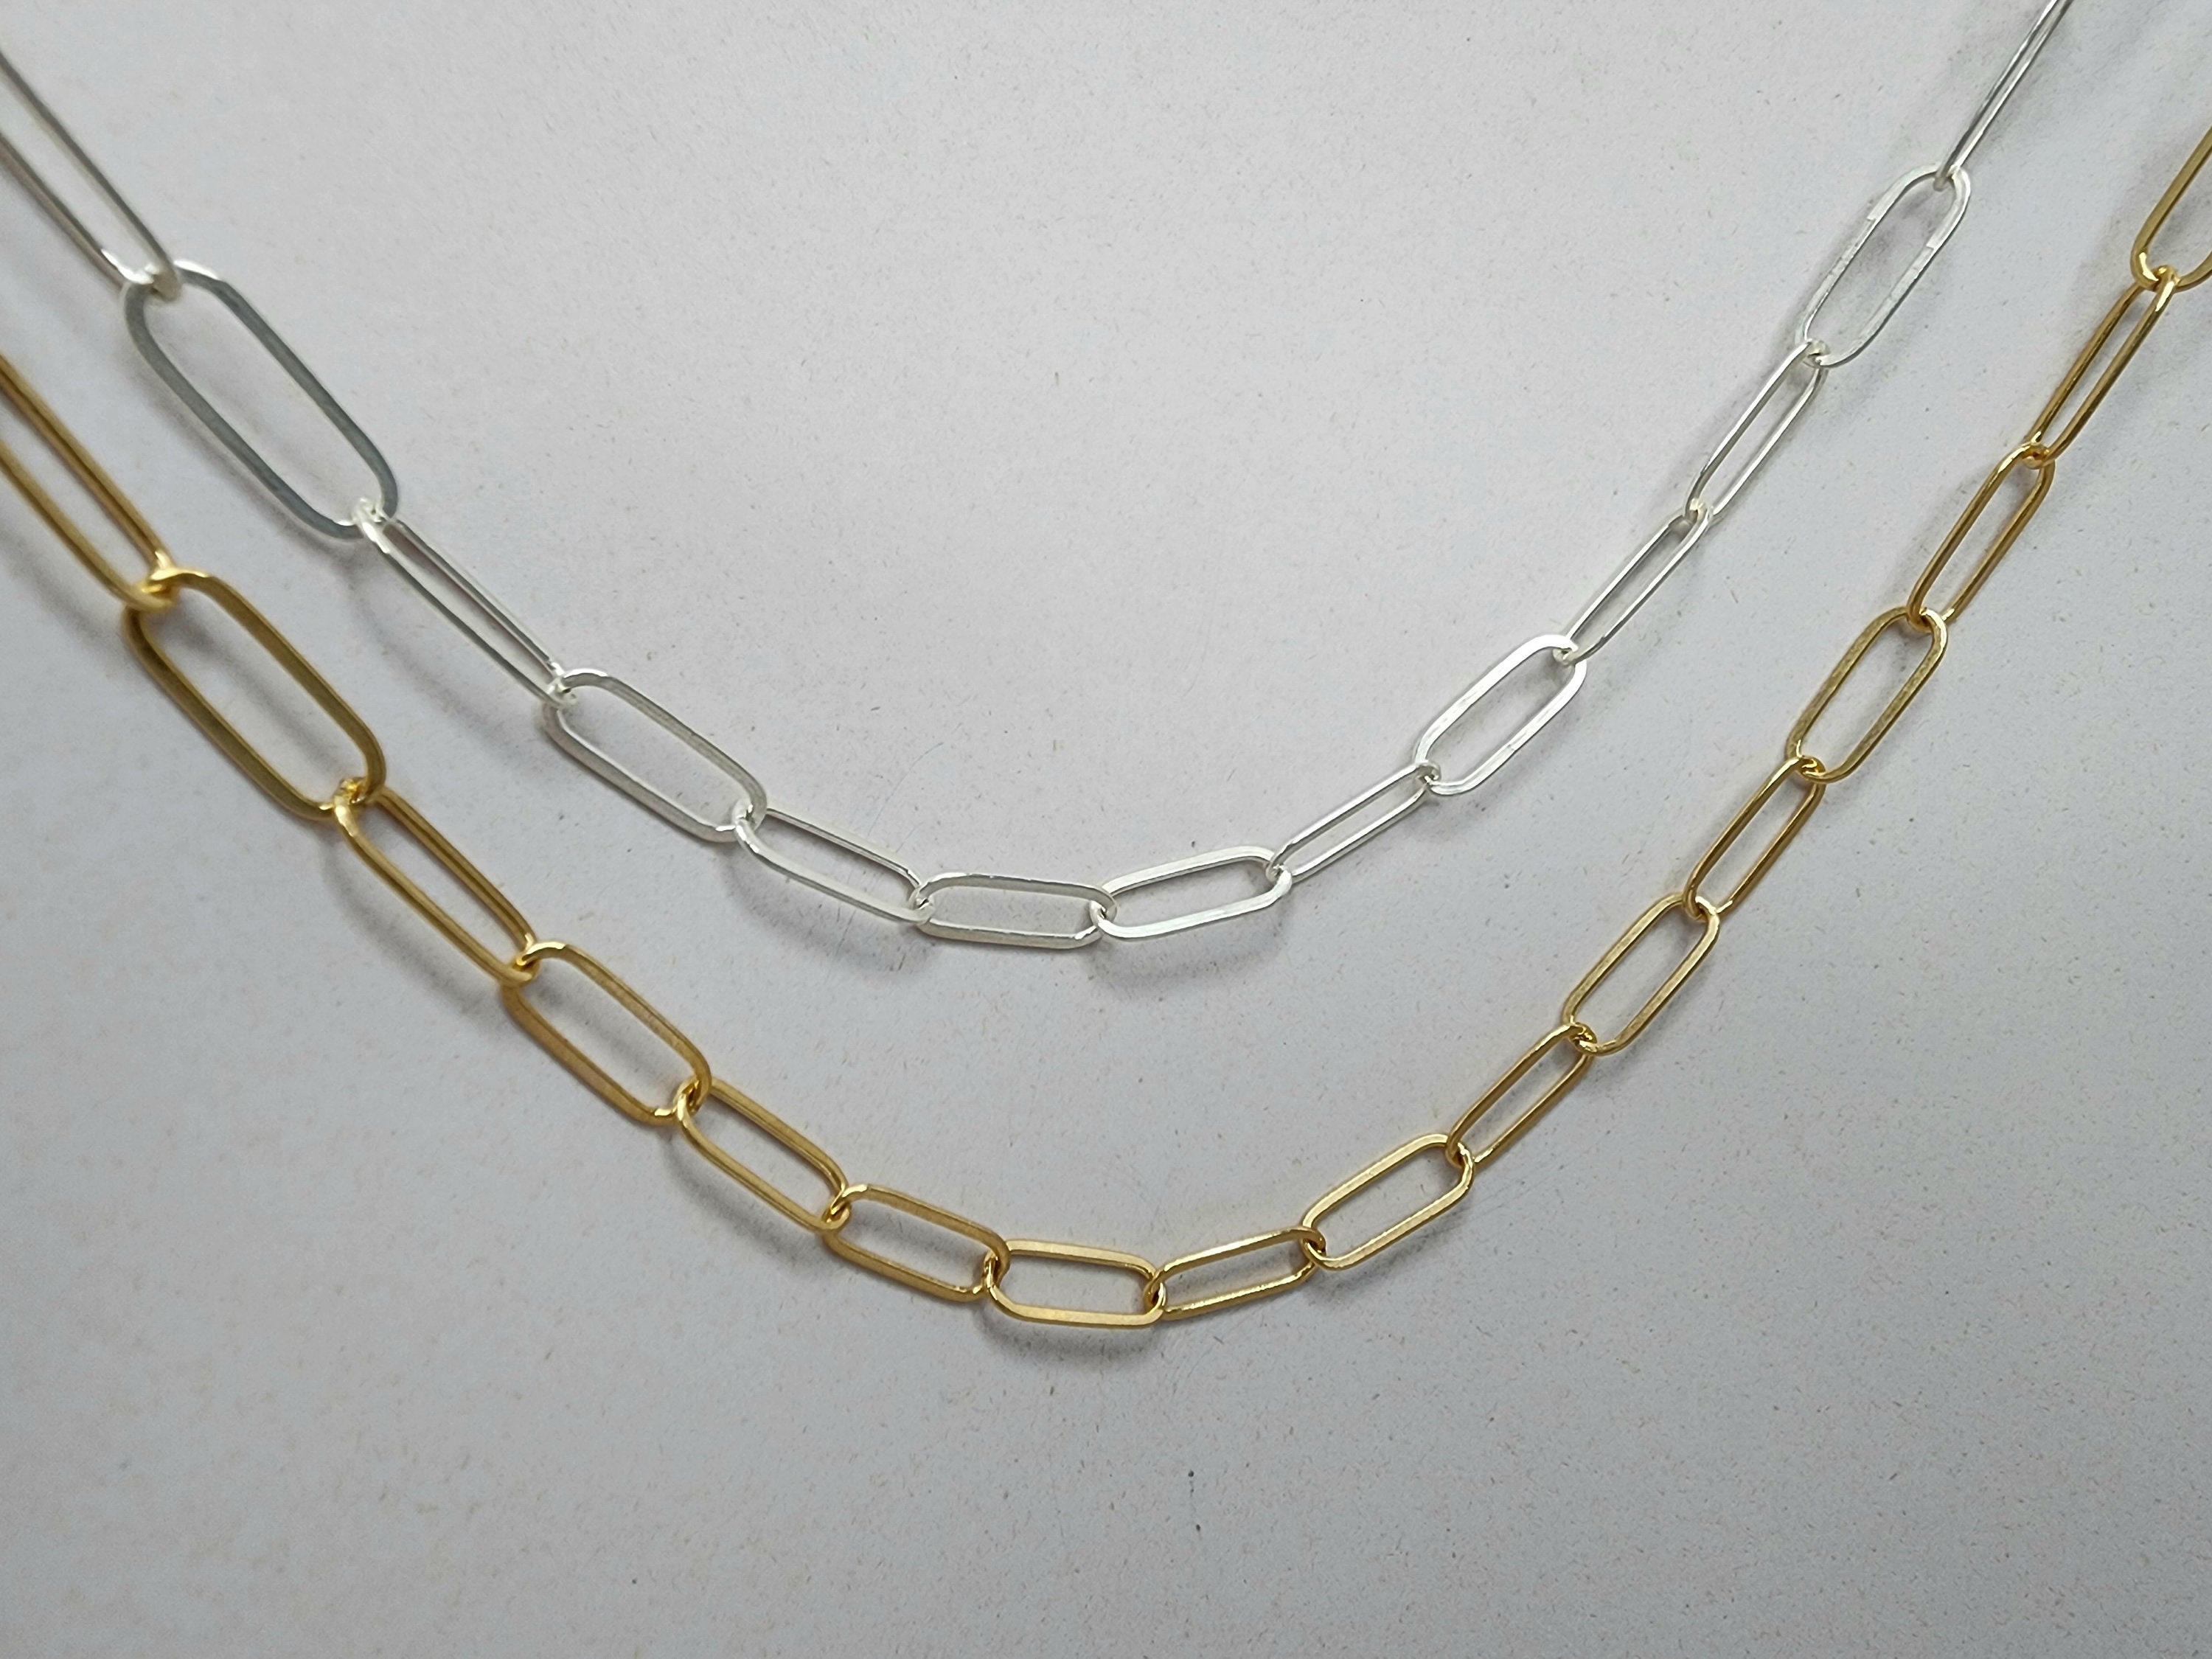 Layered Necklace Set, Set of 3, 14k Gold Filled, Sterling Silver,  Minimalist, Paperclip, Coin, Sequin, Chain, Necklace, Gold, Silver, Set